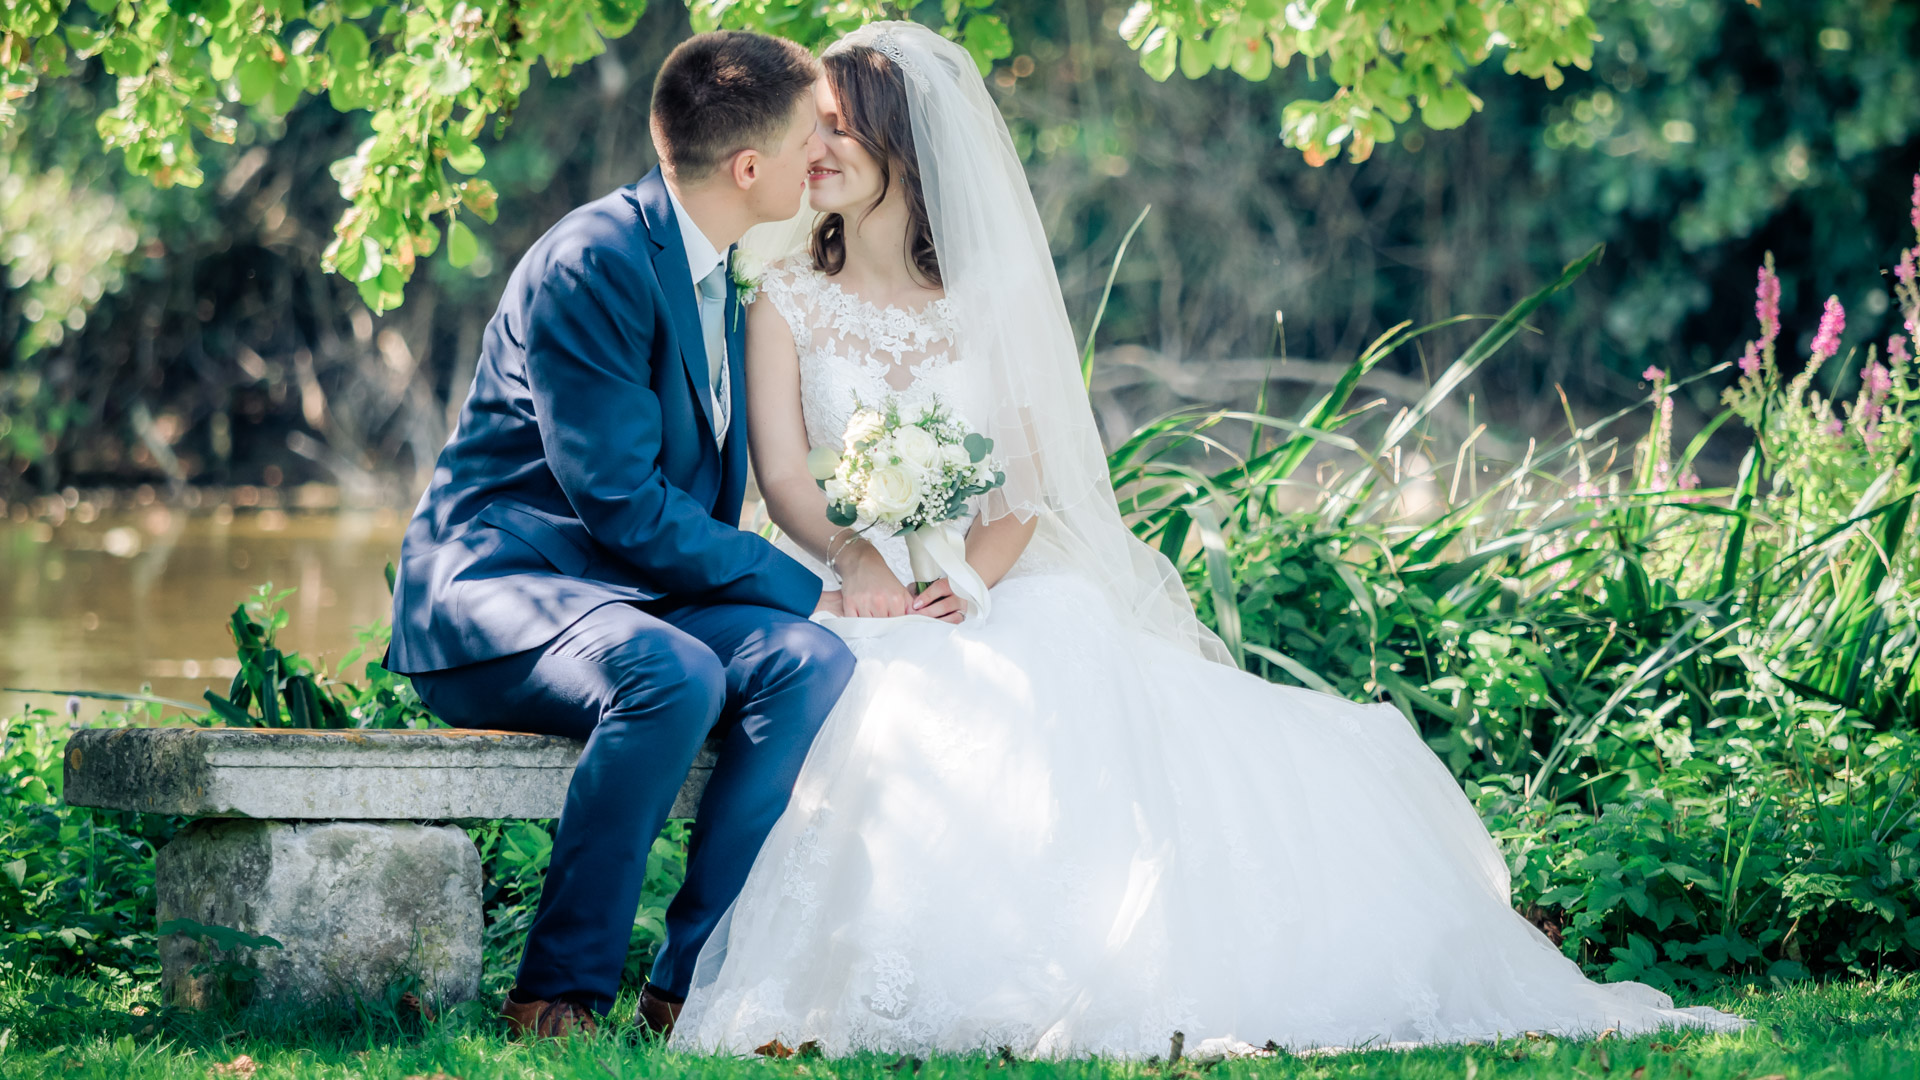 Bride and groom enjoy romantic moment seated on a stone bench in front of a lake in summertime